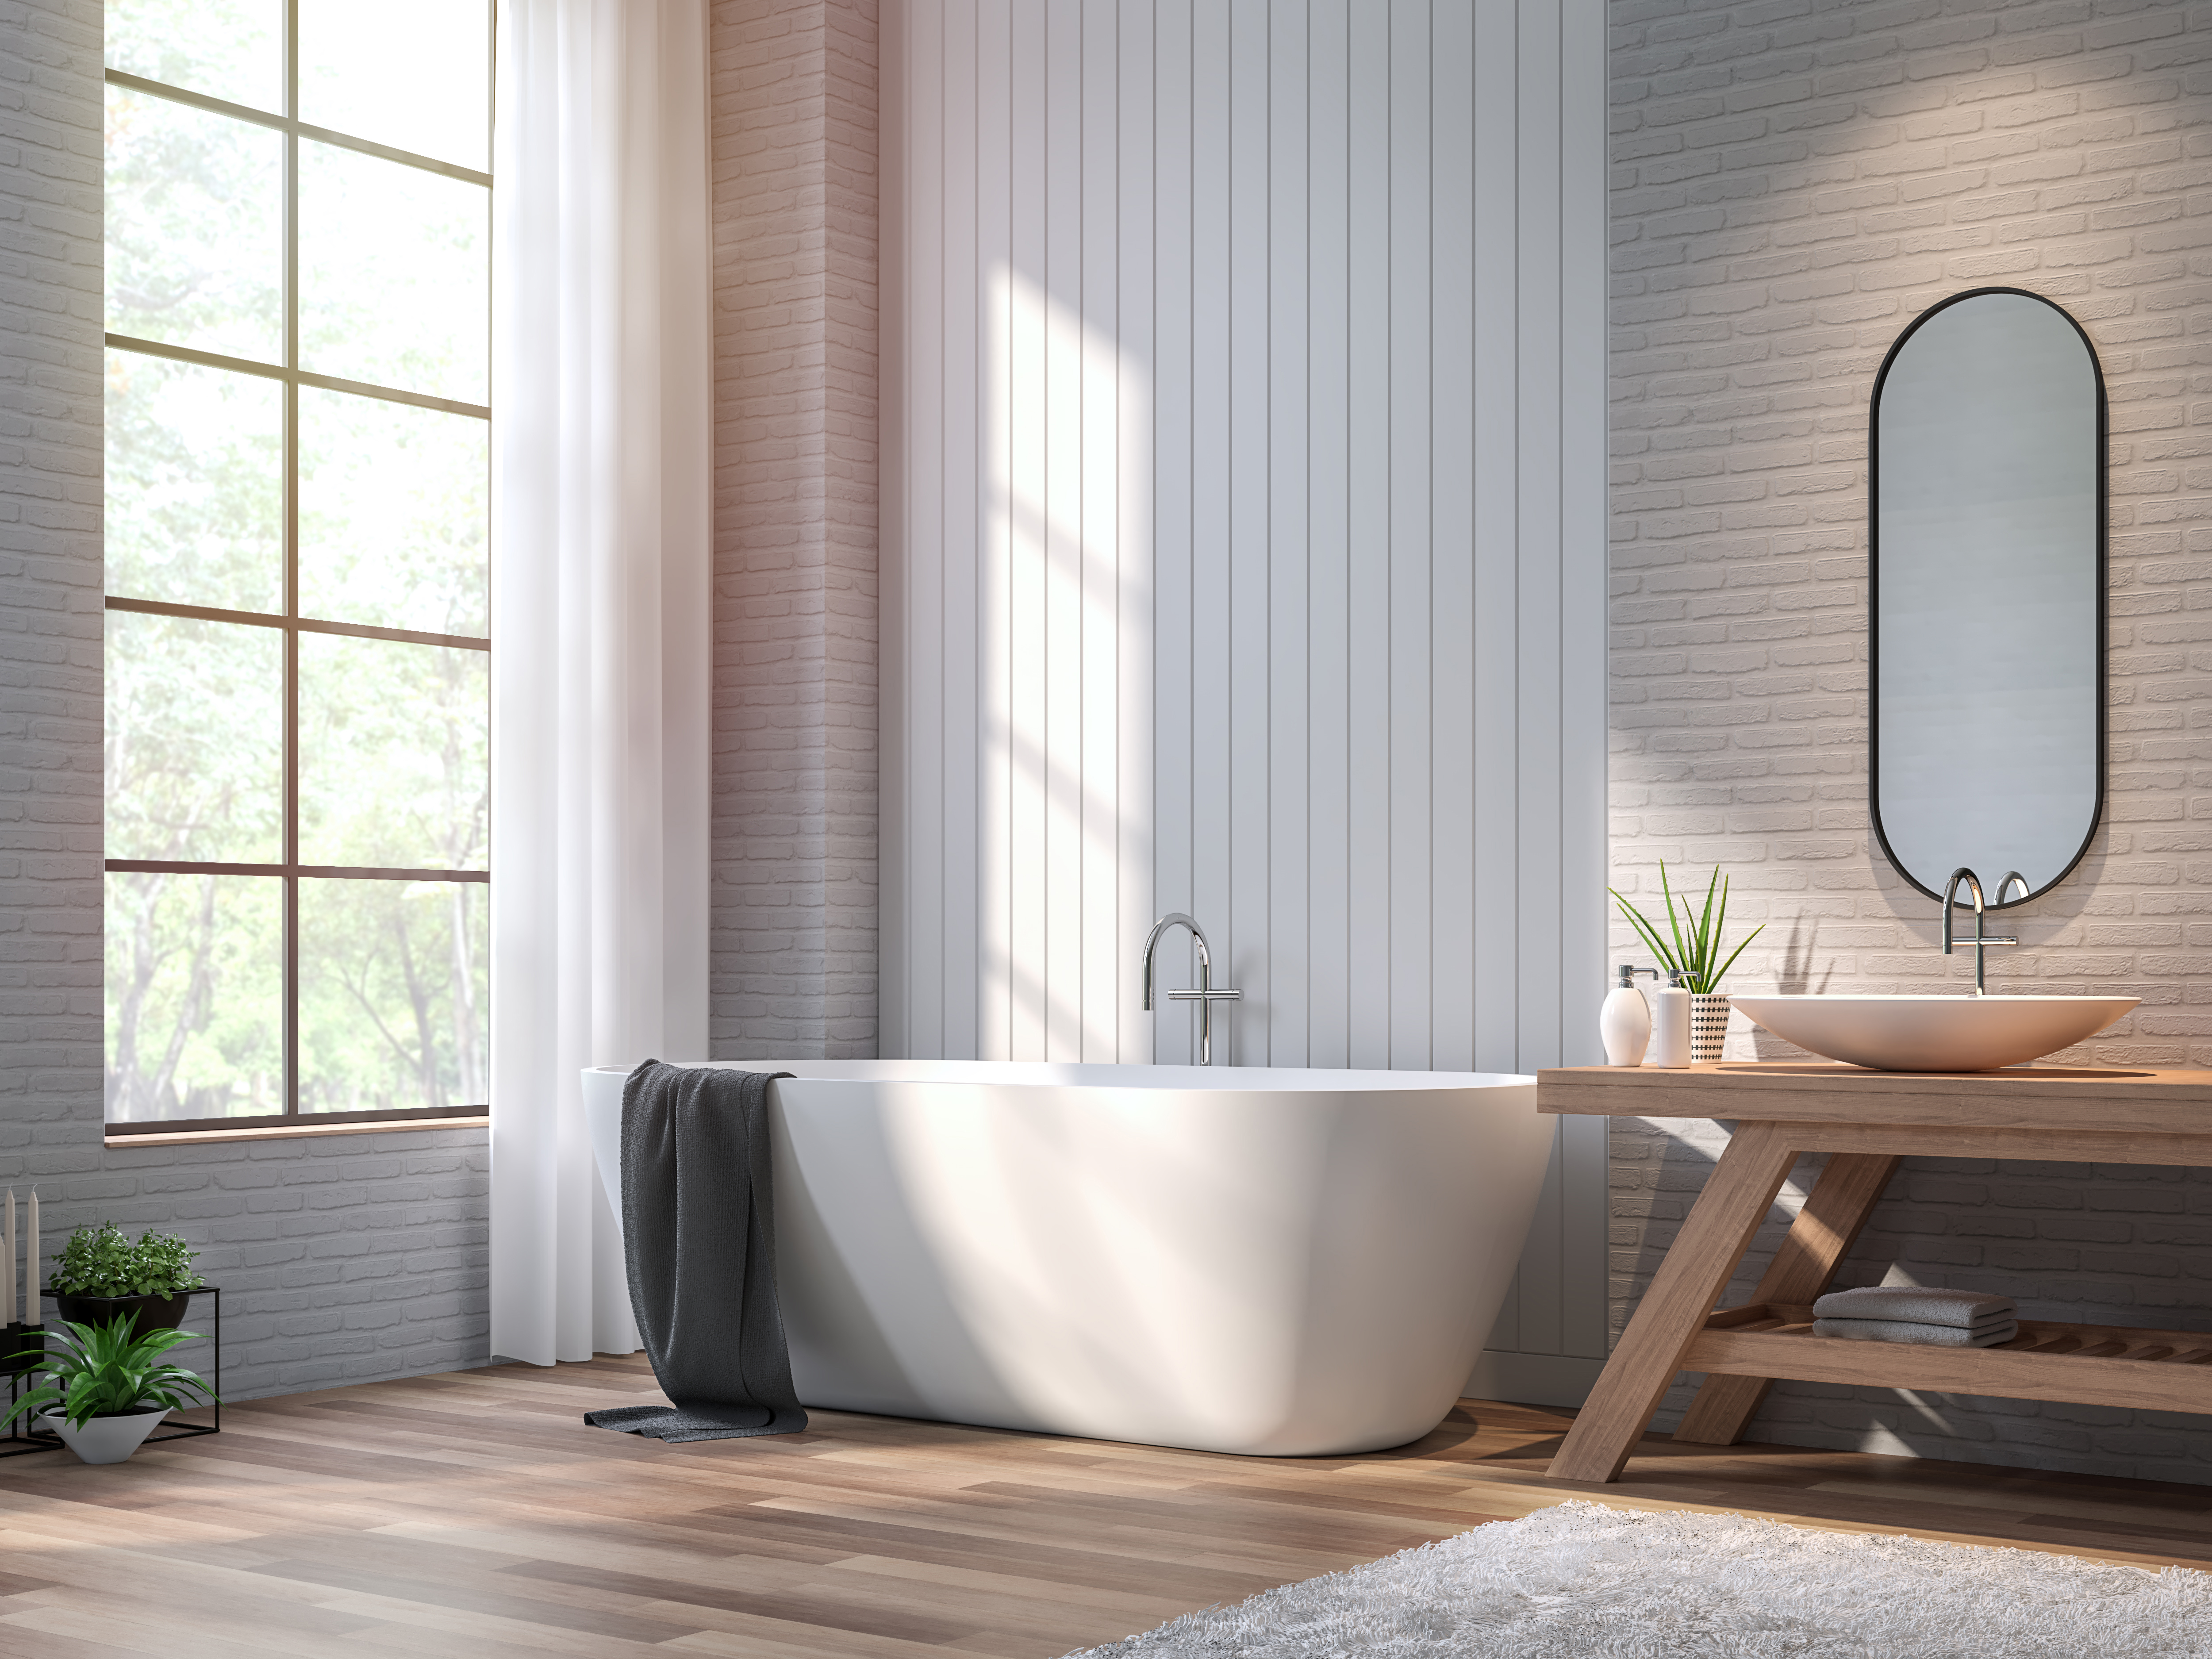 Vintage bathroom 3d render,There are wood floor,white brick and vertical wood plank wall ,Decorate with wooden basin table,The room has large windows. Sunlight shining into the room.